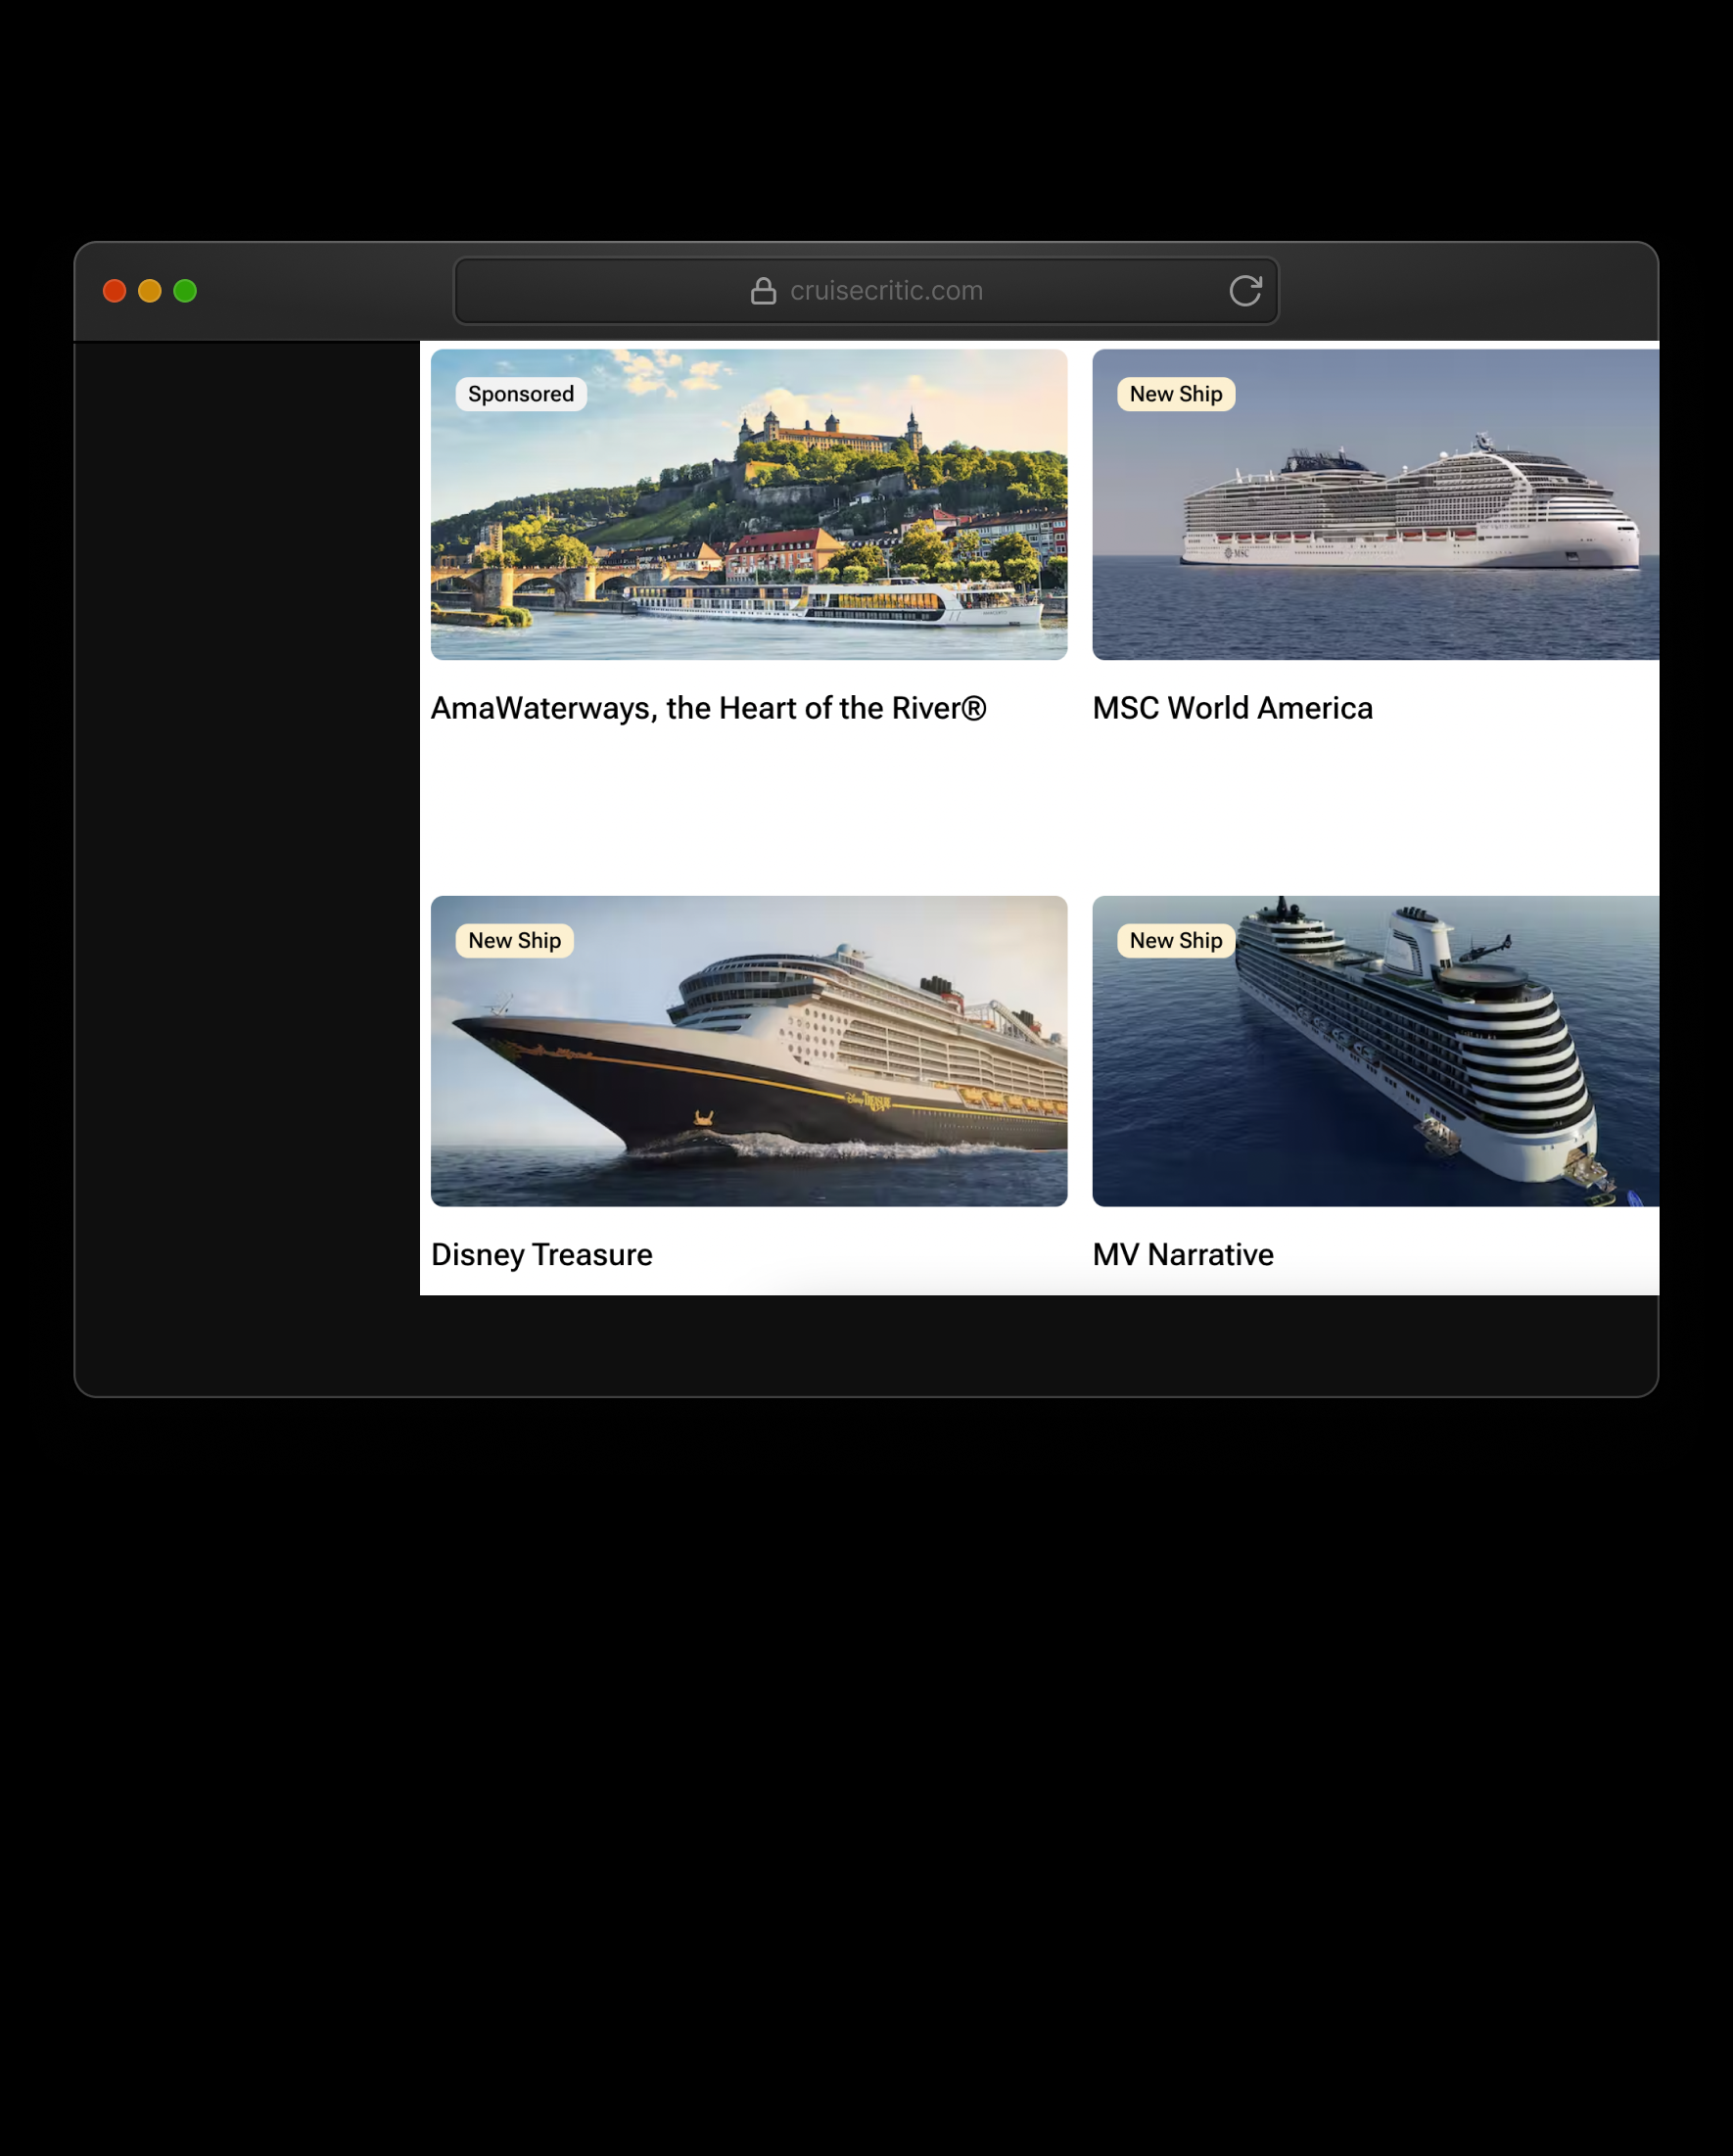 Optimizing performance for over 6M monthly visitors at CruiseCritic